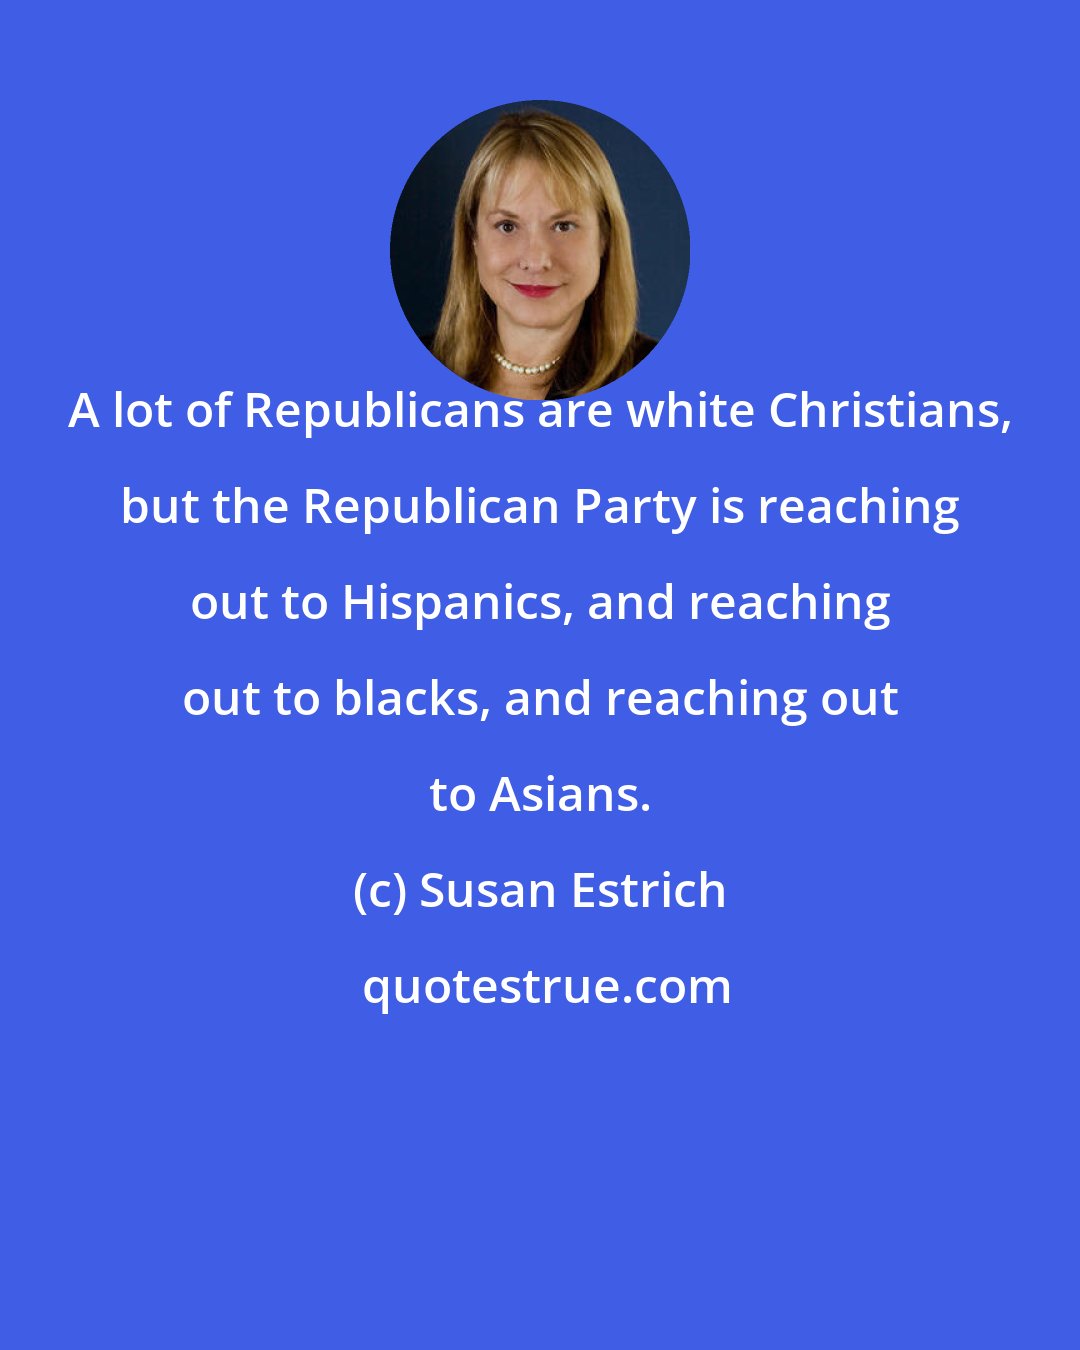 Susan Estrich: A lot of Republicans are white Christians, but the Republican Party is reaching out to Hispanics, and reaching out to blacks, and reaching out to Asians.